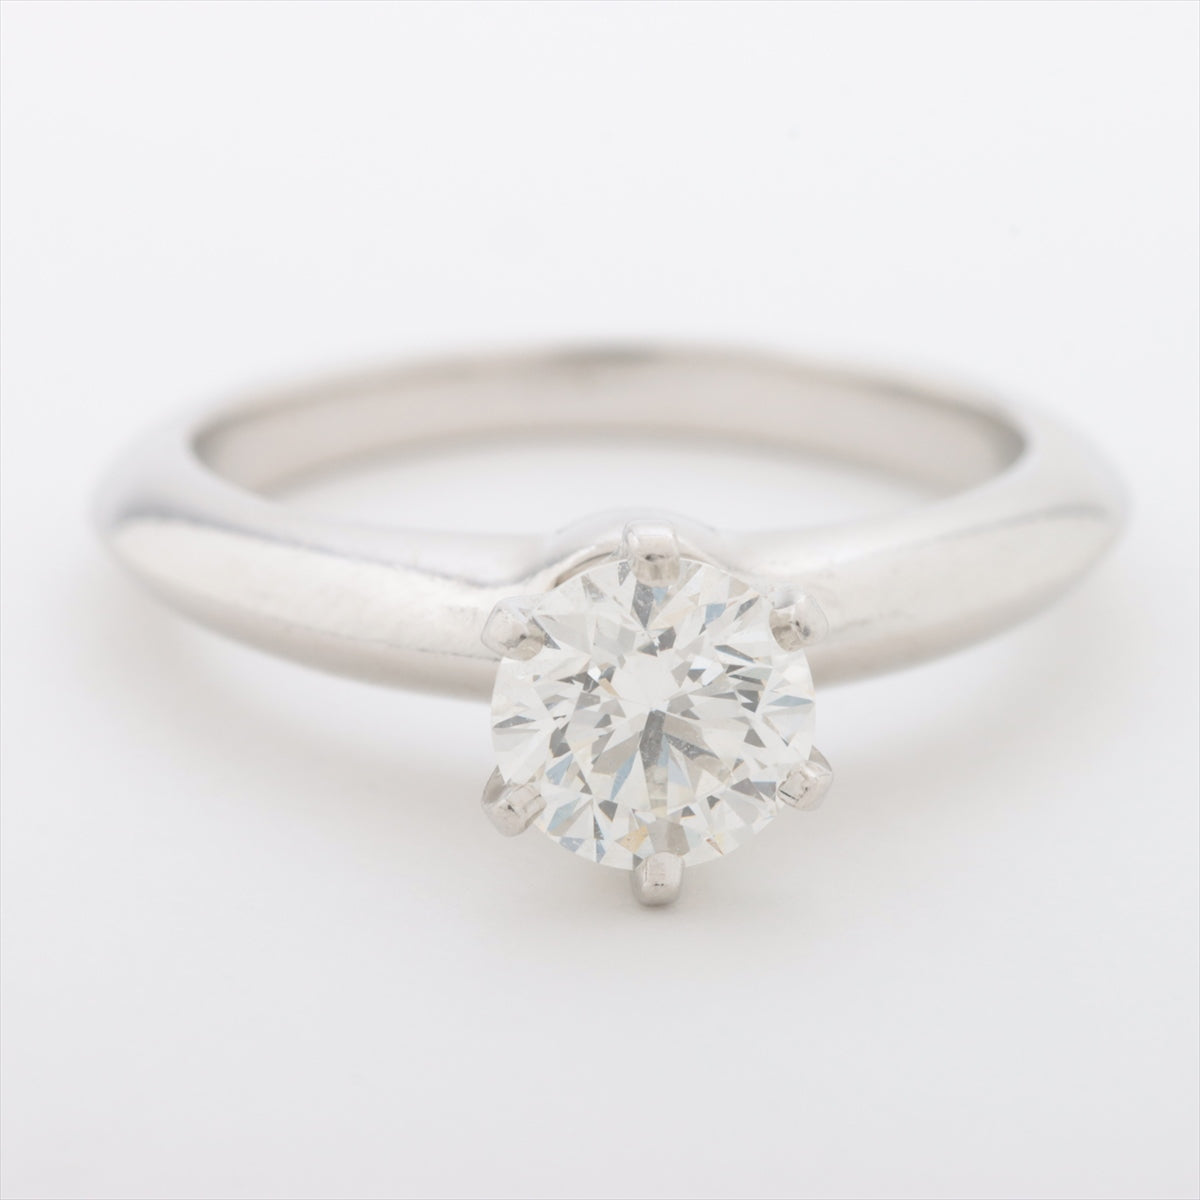 Tiffany Solitaire diamond rings Pt950 5.2g 0.69 Stamped thin